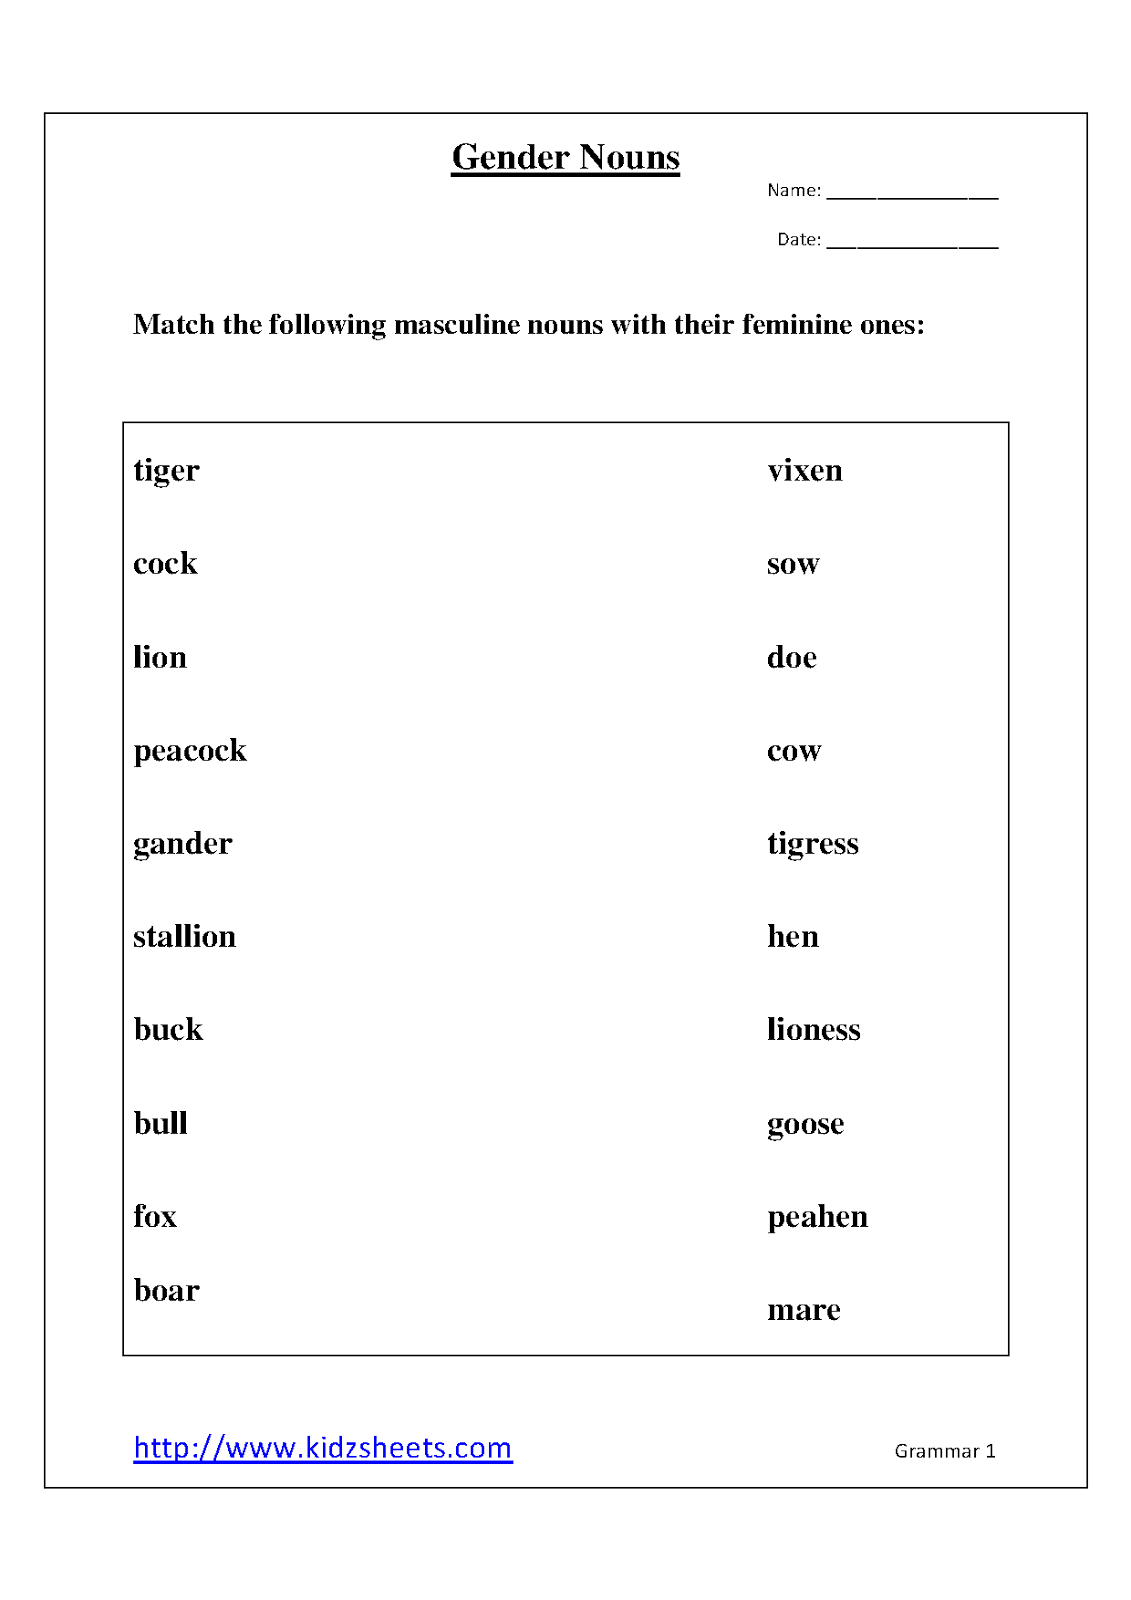 noun worksheets for grade 1 with answers noun worksheets for grade 1 with answers with for 1 noun worksheets answers grade 